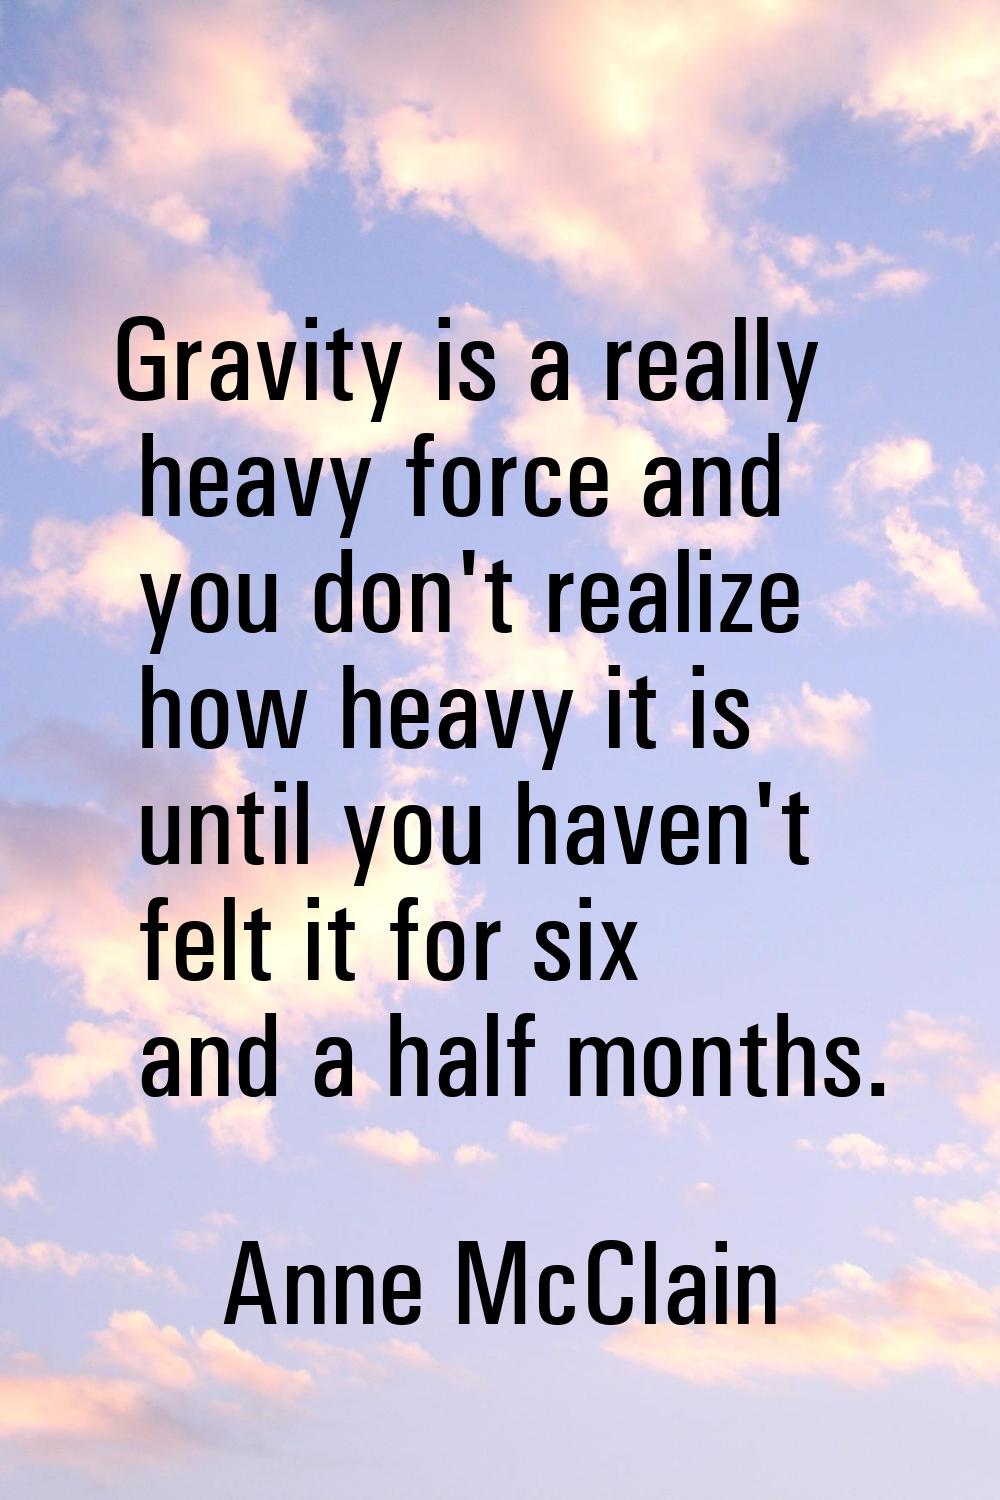 Gravity is a really heavy force and you don't realize how heavy it is until you haven't felt it for